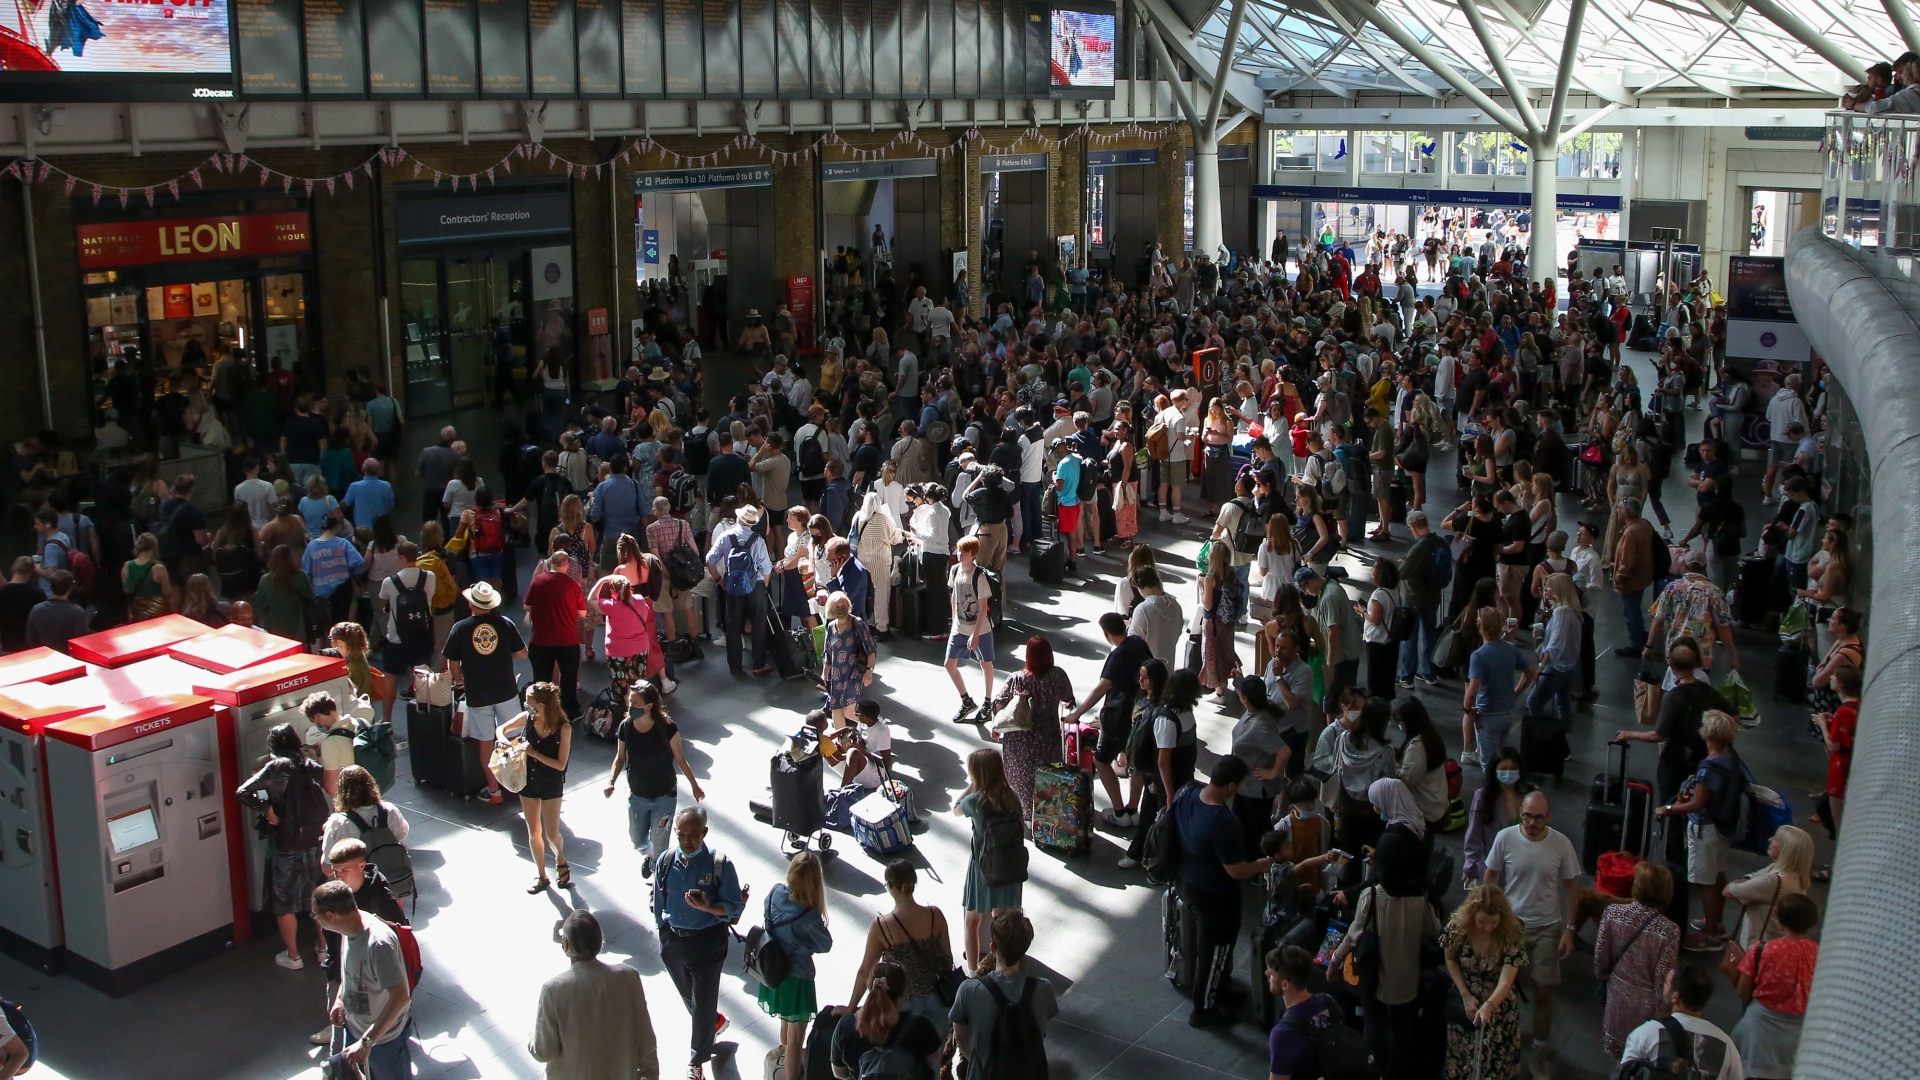 Train stations throng with people looking for weekend escapes in the sun are a chaotic scene.